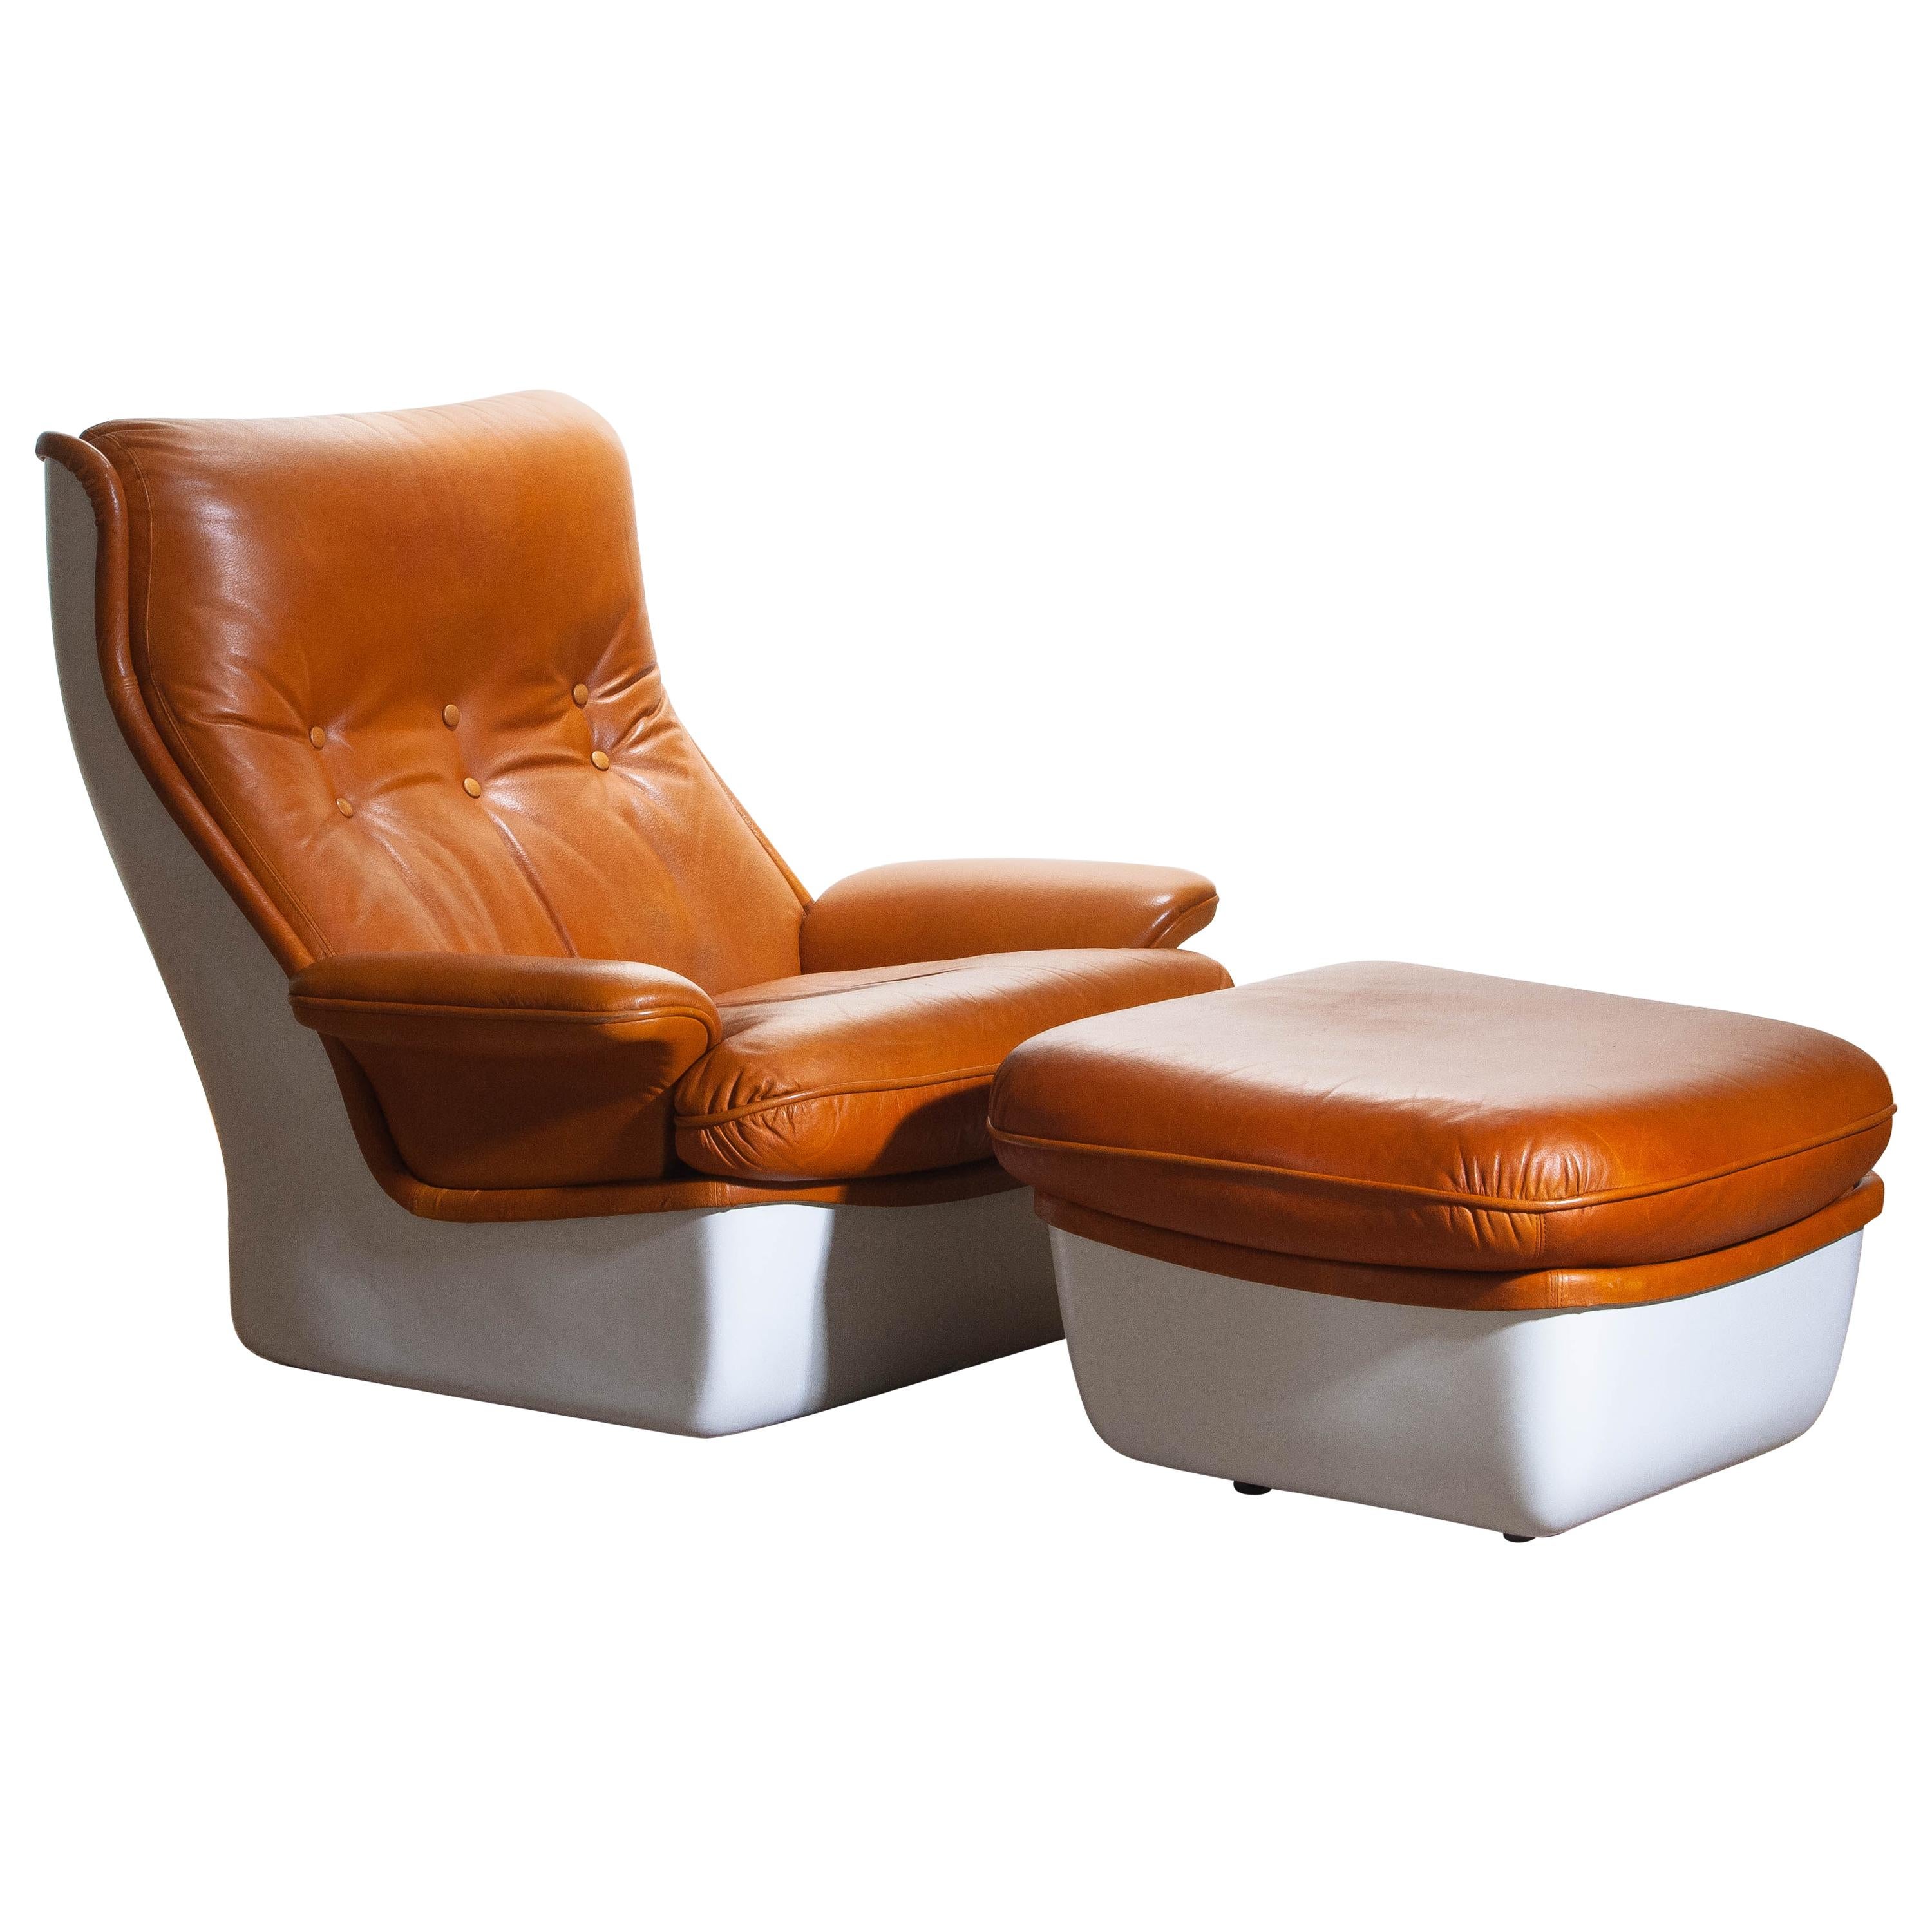 1970, a Classic and beautiful French airborne International lounge chair and ottoman by Marc Held.
The original cognac leather and polychromed fiberglass shell both mounted on ball casters are both in very good condition.